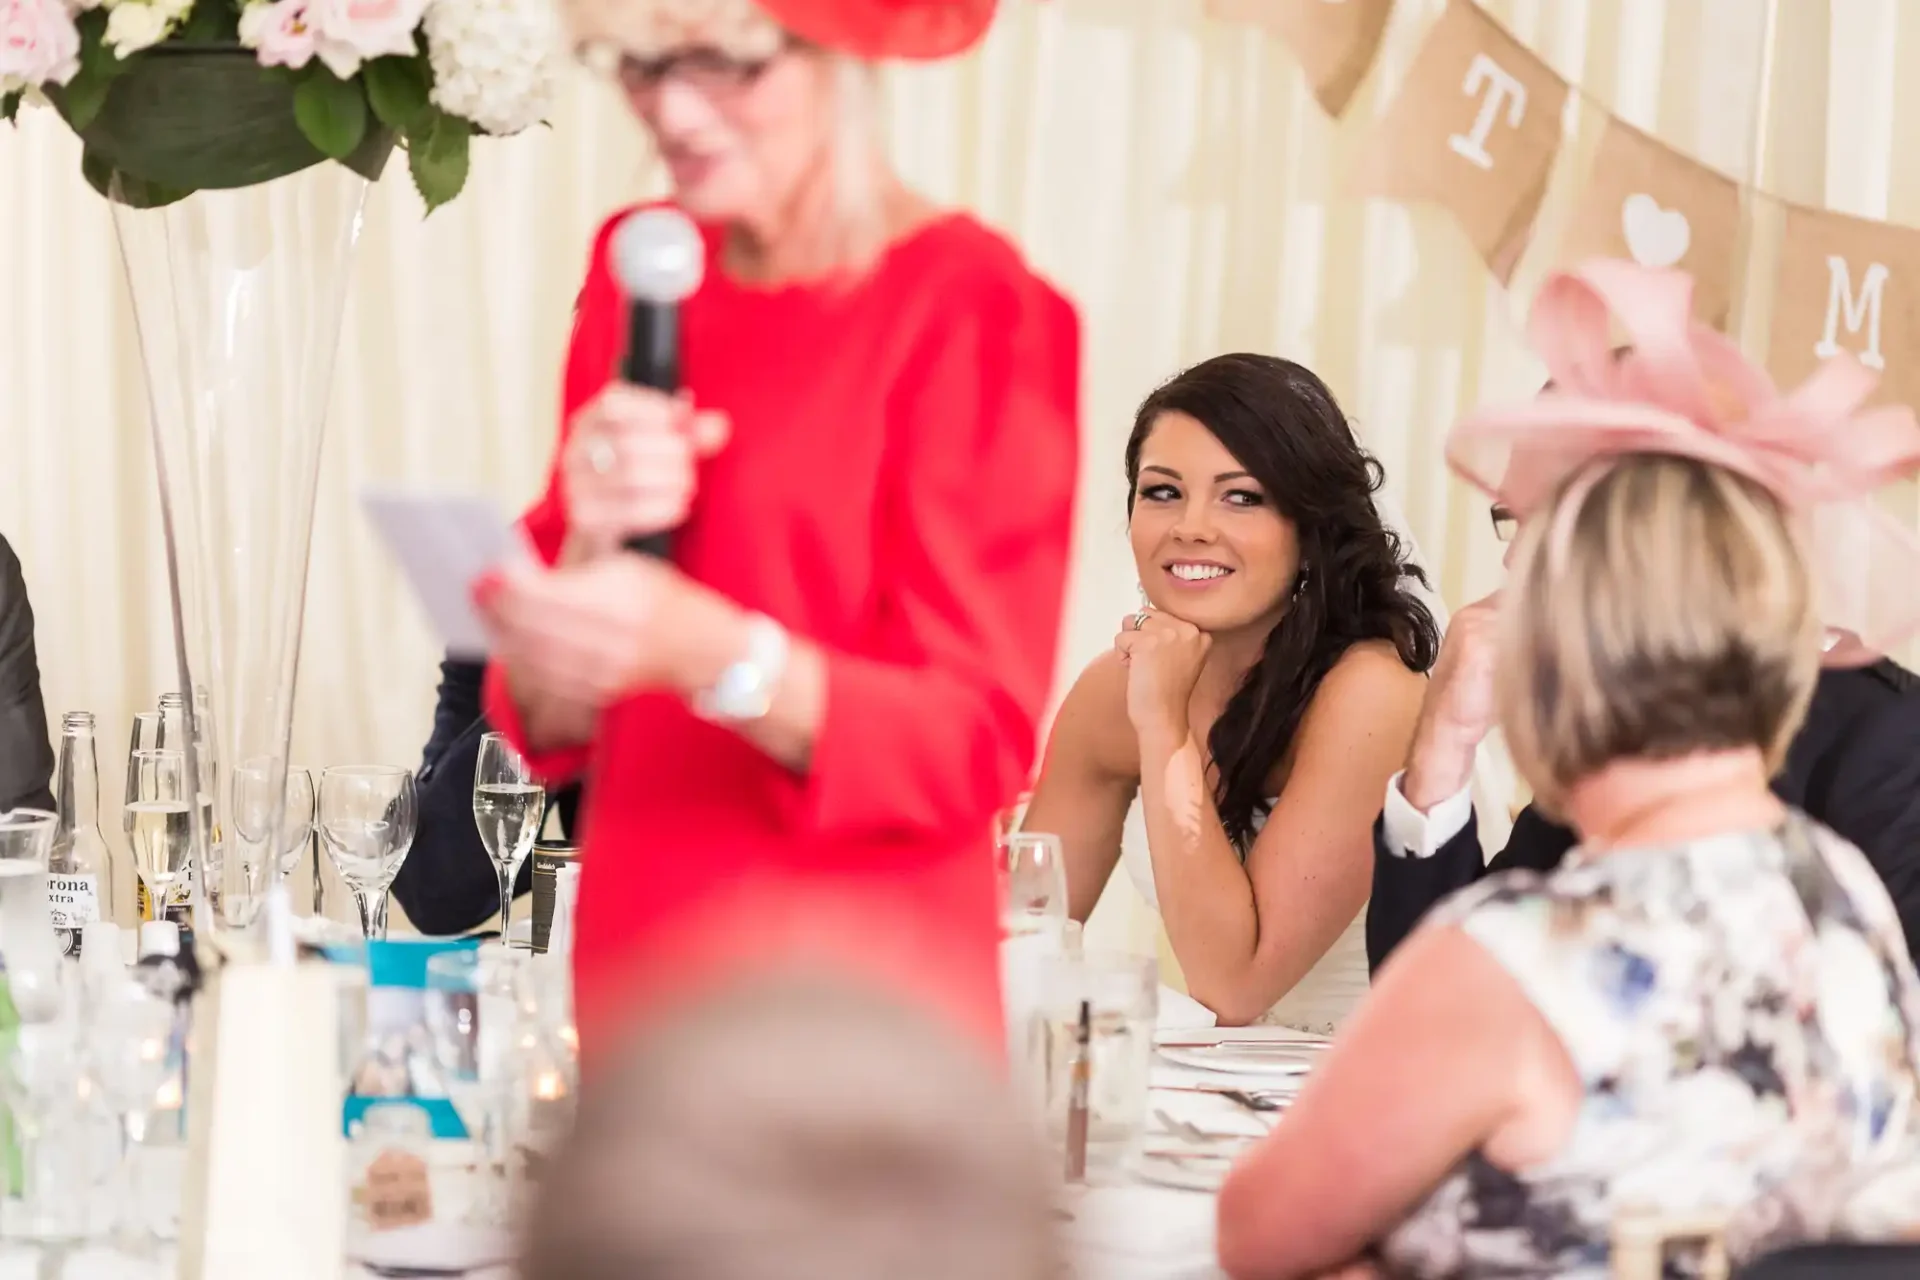 A woman in a red dress speaks into a microphone at a wedding reception, while a smiling young woman in the background looks on.